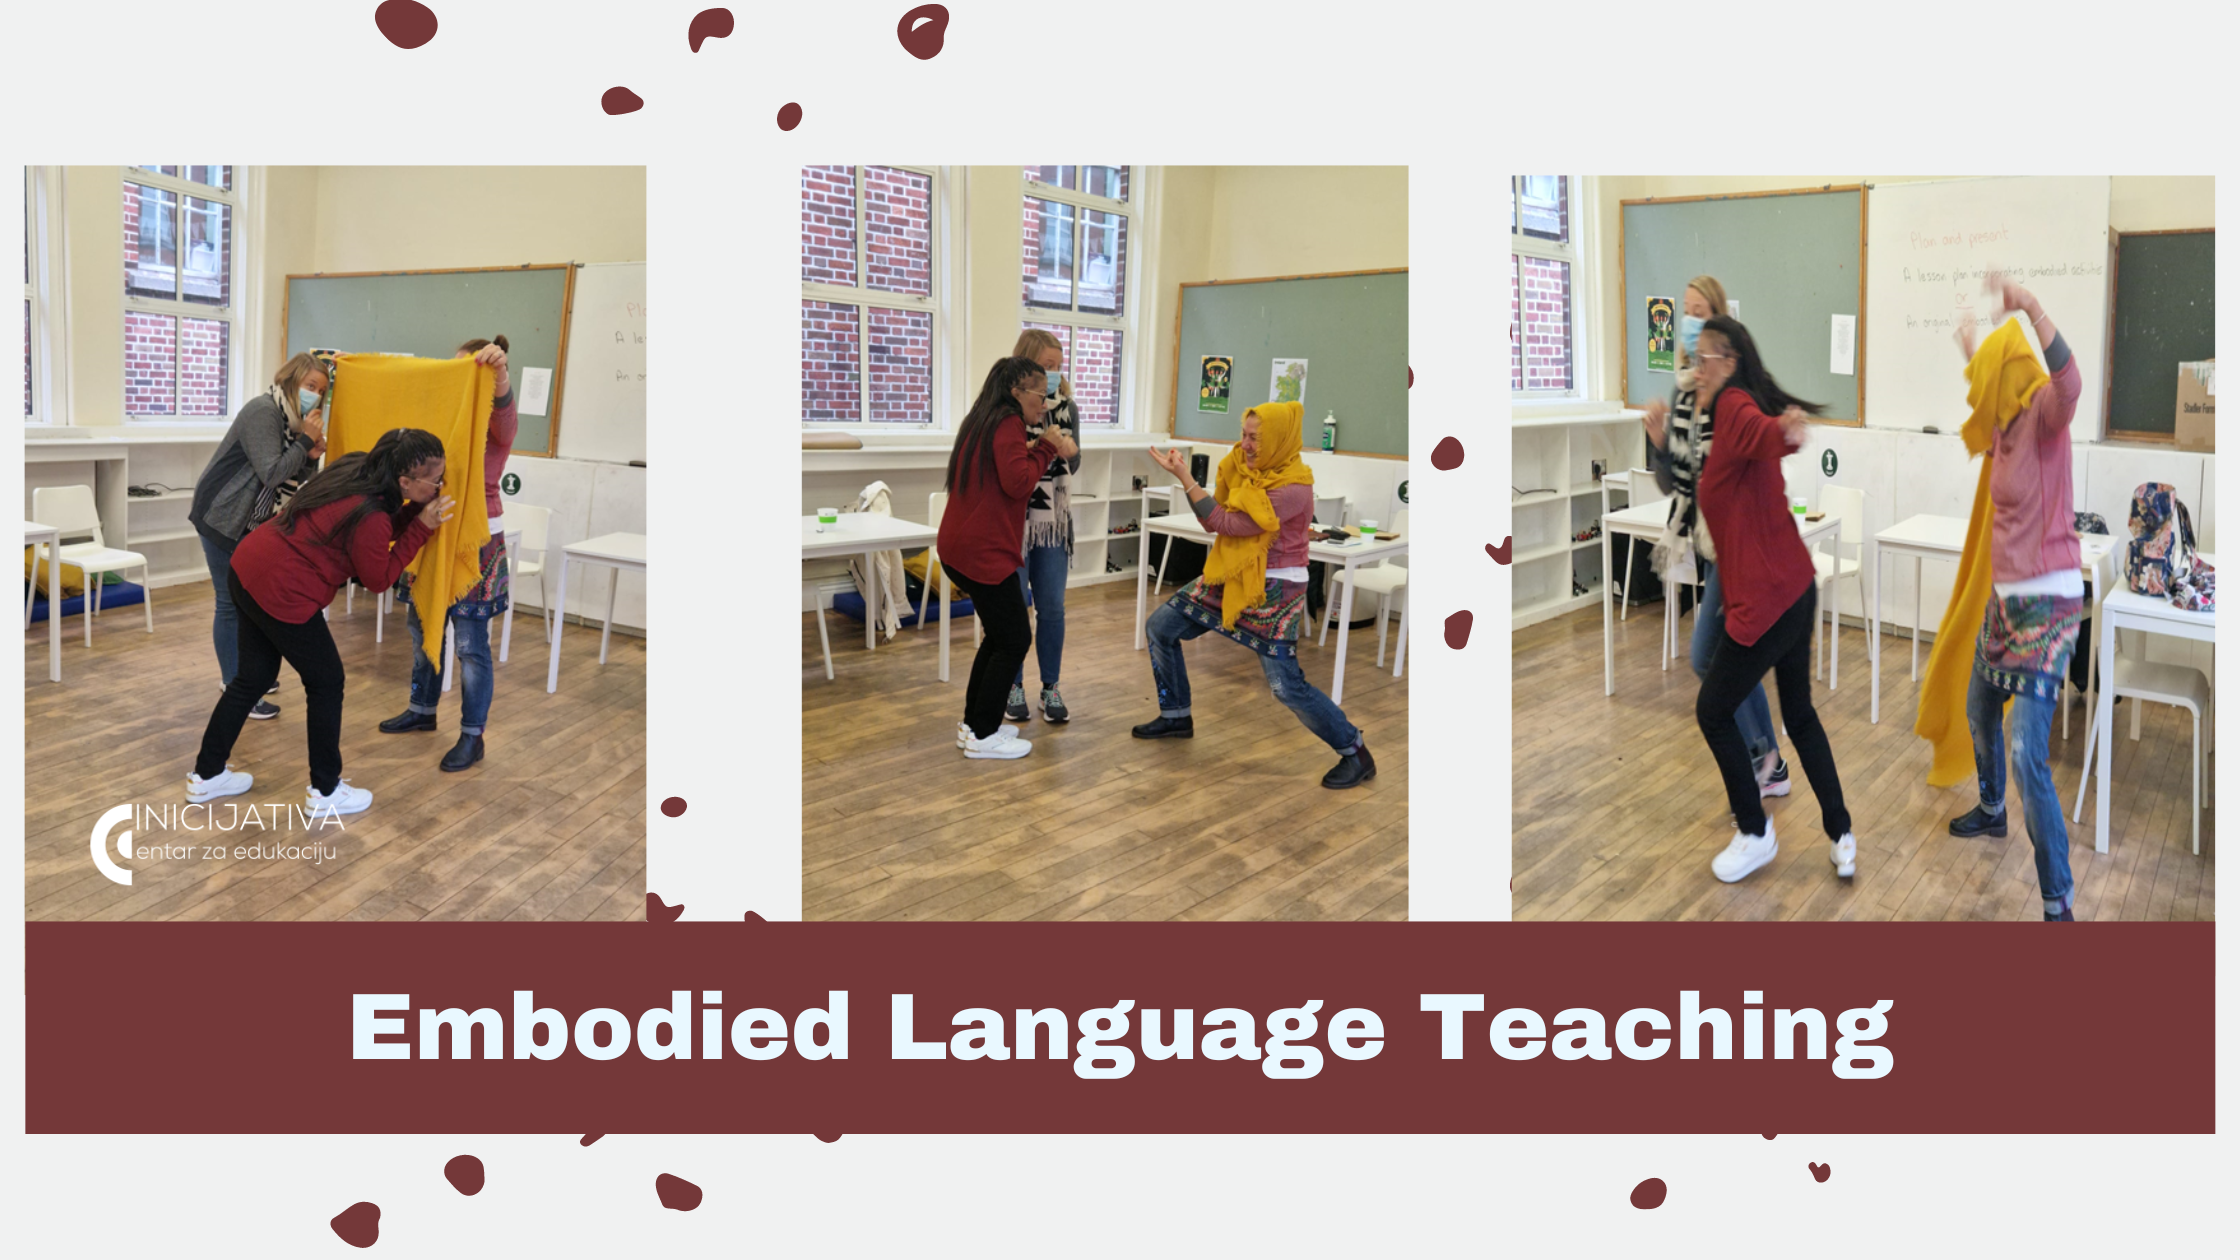 Traditional language learning versus Embodied language learning